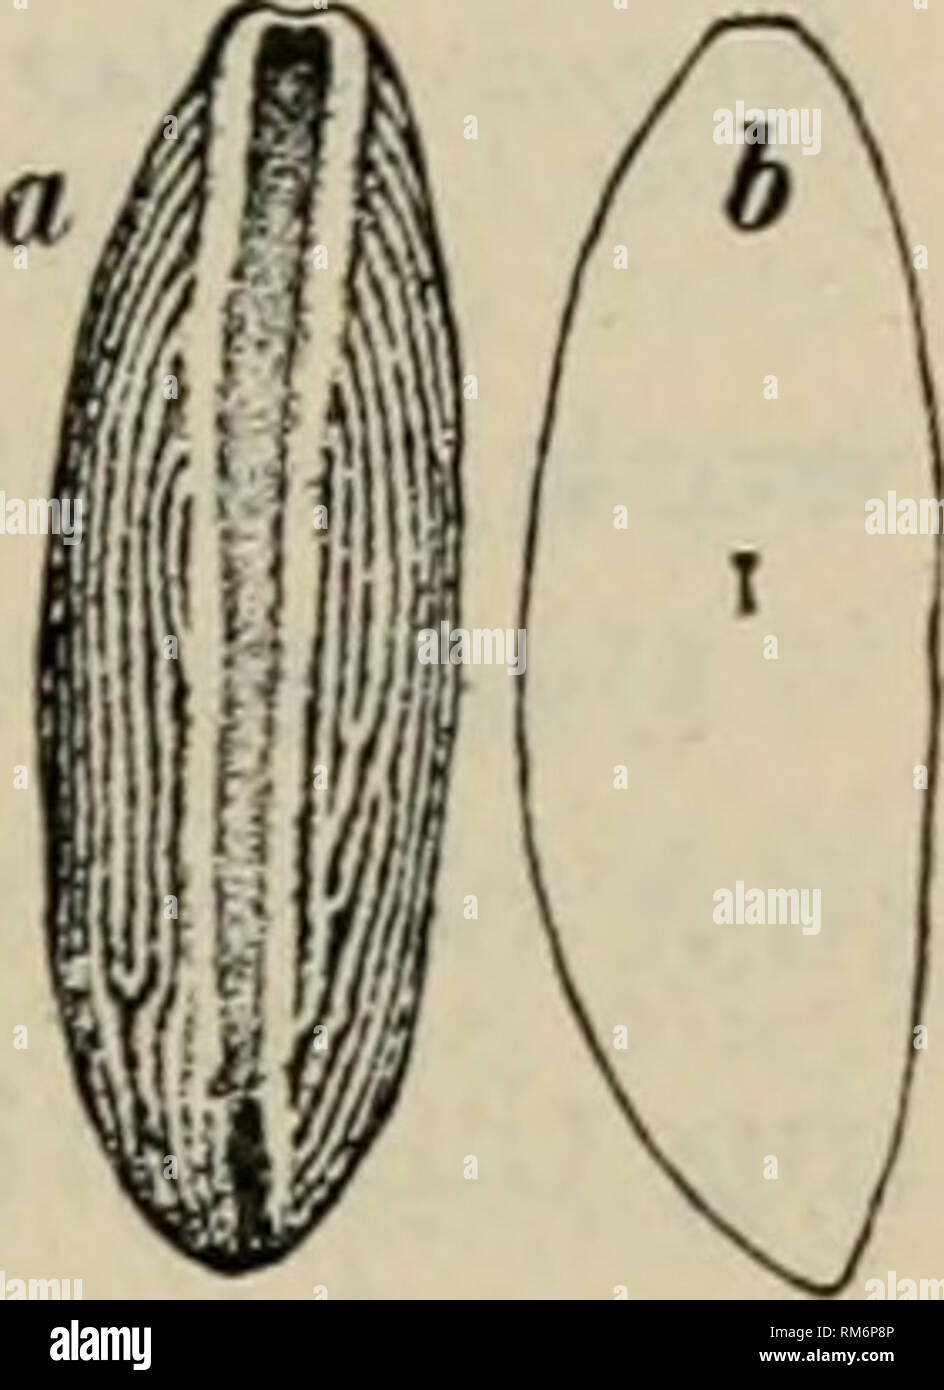 . Annual report of the Agricultural Experiment Station. Cornell University. Agricultural Experiment Station; Agriculture -- New York (State). The Cabbage Root Maggot. 507 stalk on the soil and are readily seen with keen eyes. In 1887, Prof. Cook recorded finding hundreds of eggs about a single plant. This is no exaggeration, for we have found at least 300 maggots at work on a single cabbage plant. Several flies must lay their eggs on one plant to produce such a crop of maggots; and when only lo or 20 maggots occur, a single fly must oviposit on several plants. This statement is based on the fo Stock Photo